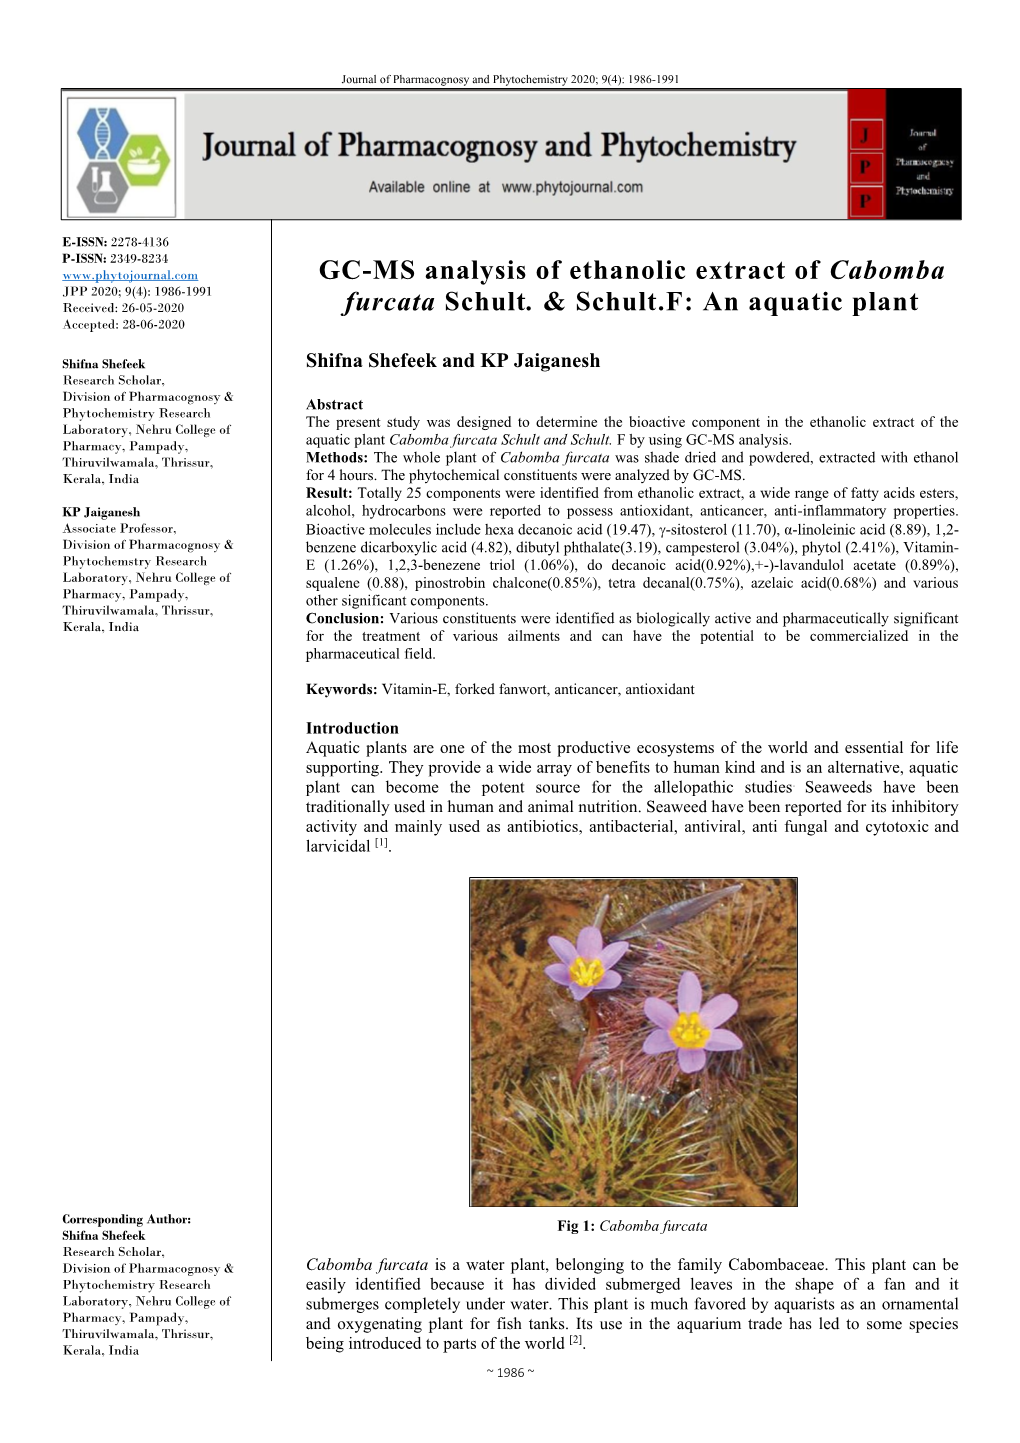 GC-MS Analysis of Ethanolic Extract of Cabomba Furcata Schult. & Schult.F: an Aquatic Plant